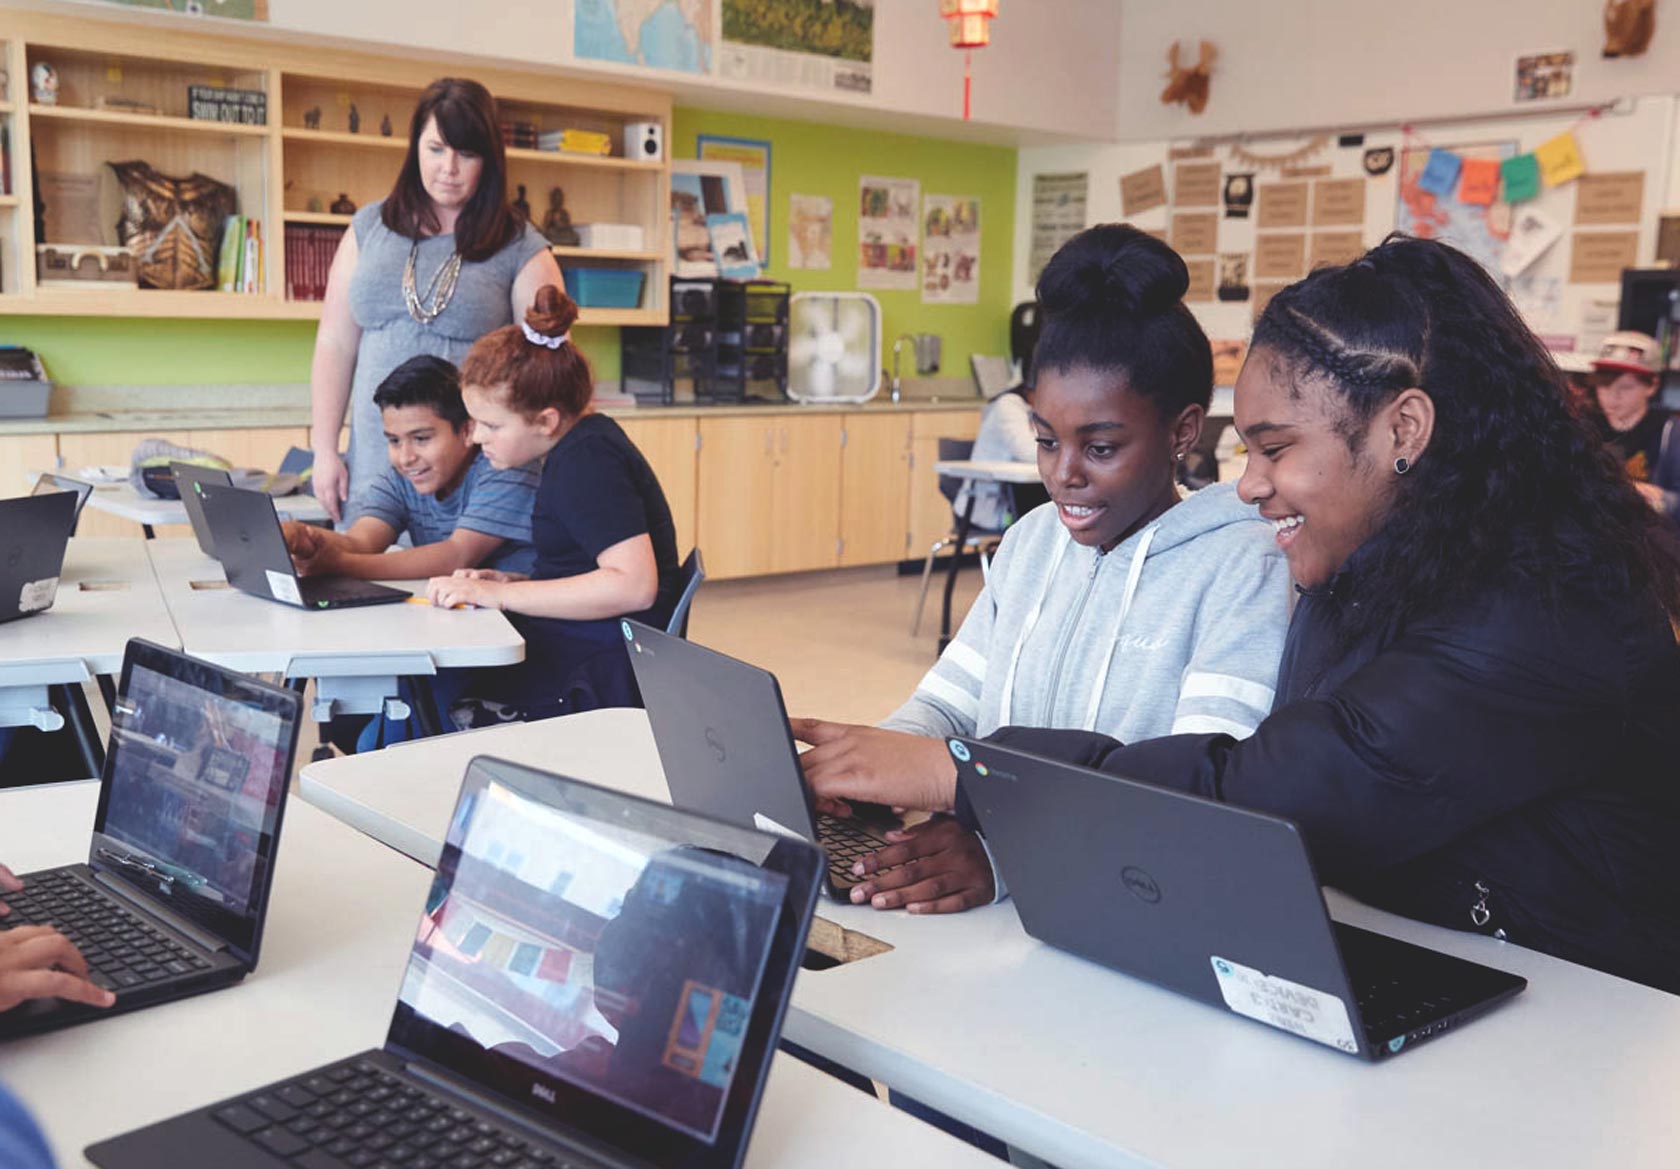 A classroom with two Black girls smiling and looking at a laptop, with a Latino boy, White girl, and female teacher in the background.